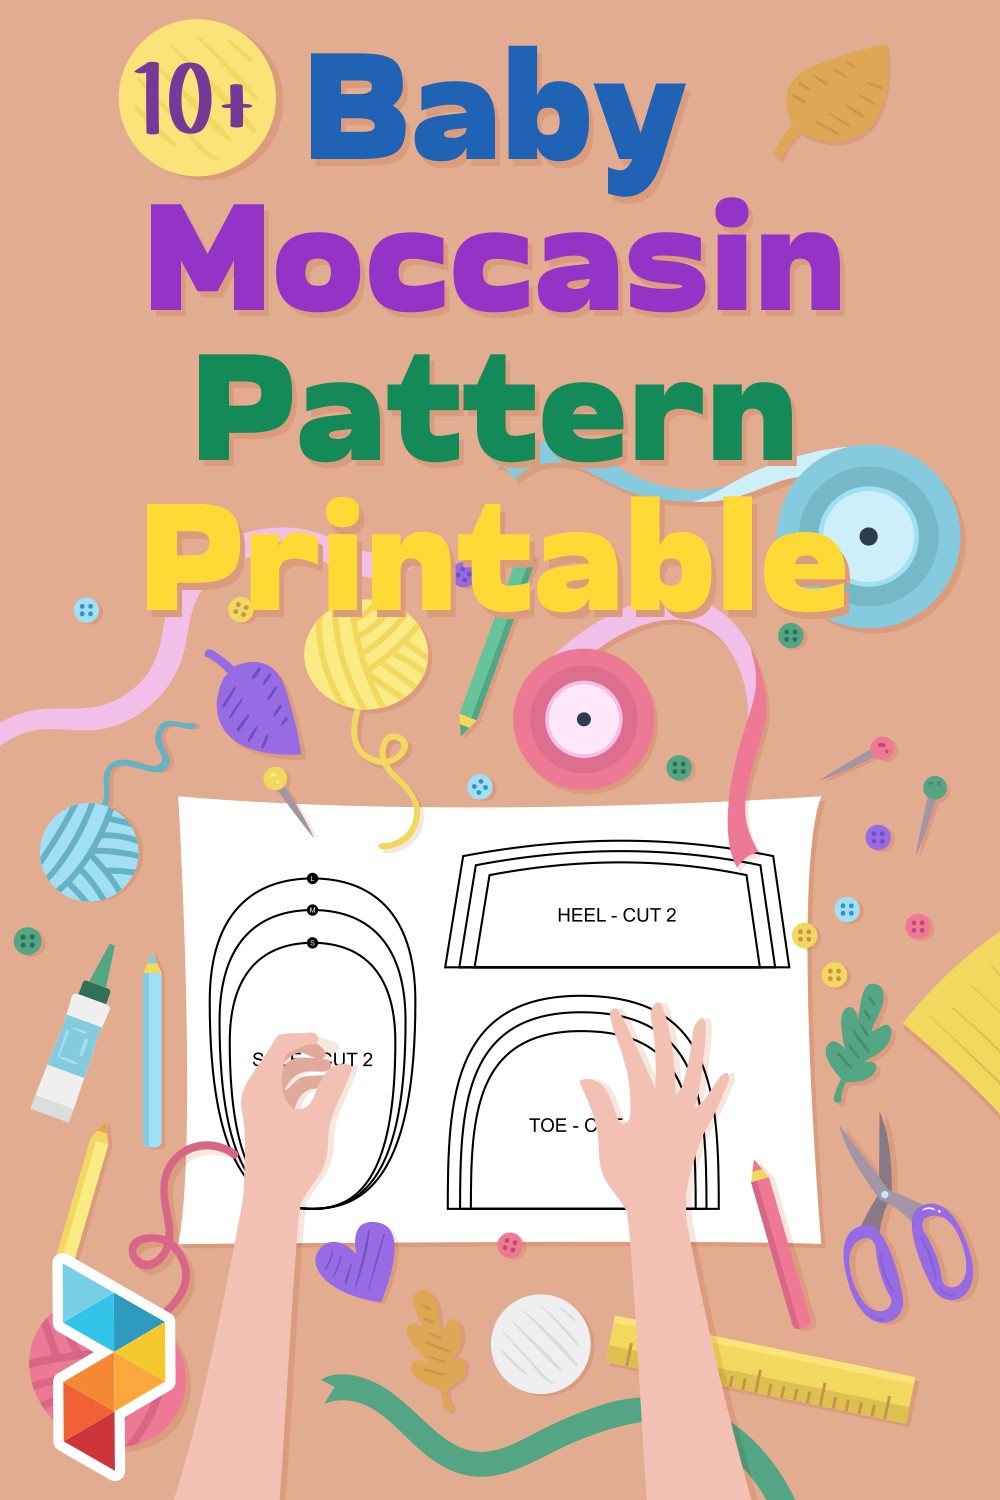 Baby Moccasin Pattern